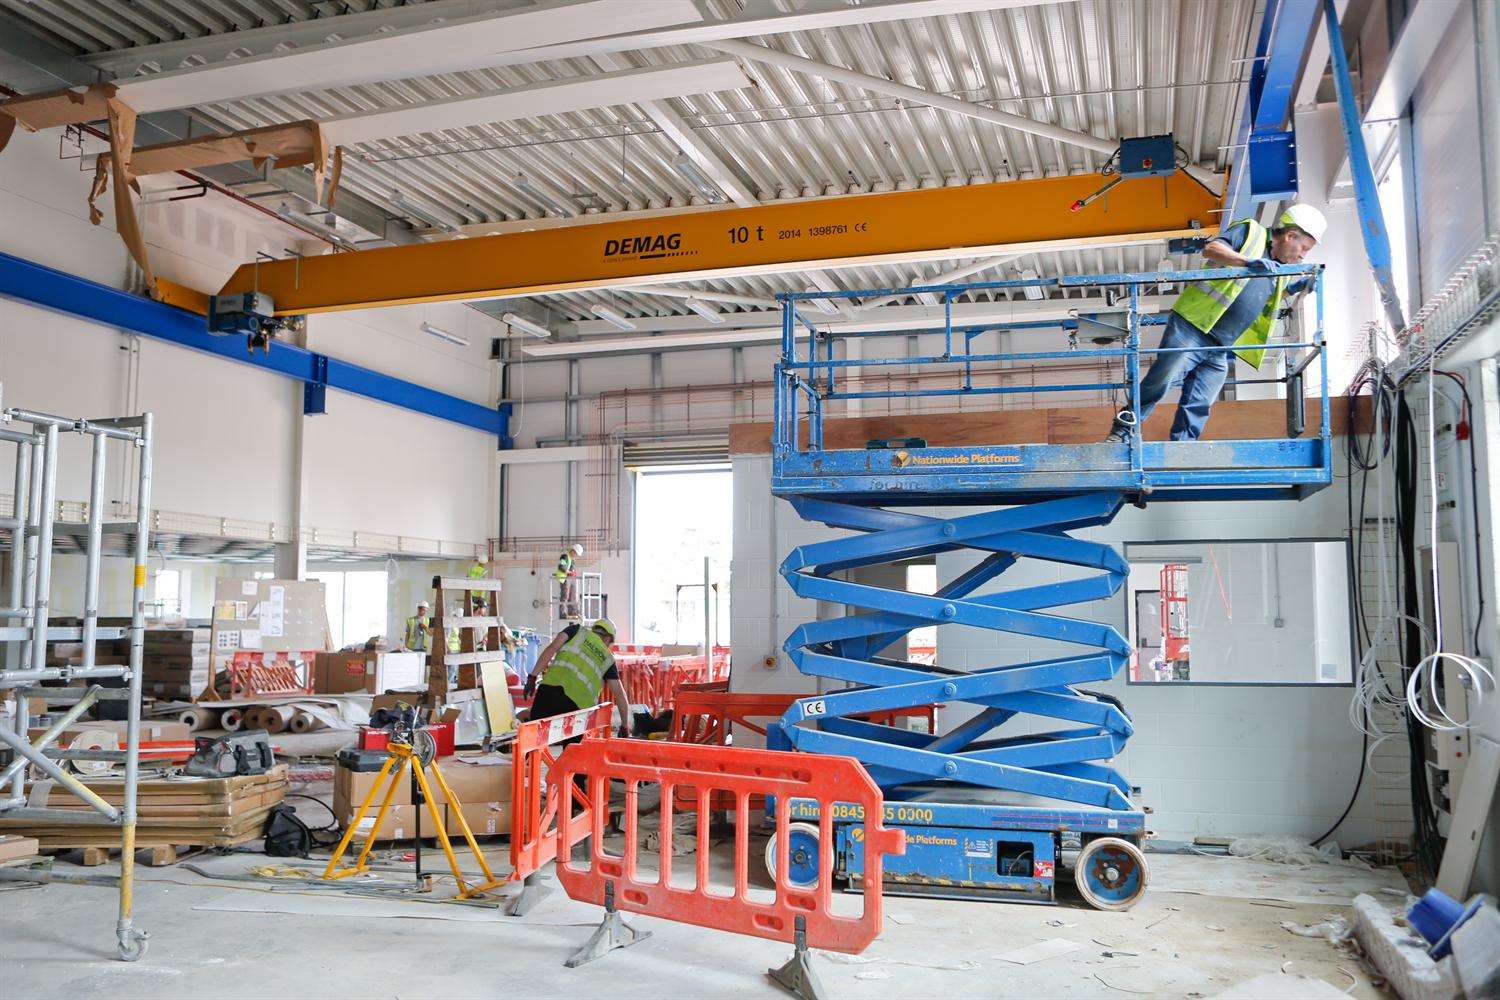 The 10-ton crane which will lift equipment into the workshop at Leigh UTC